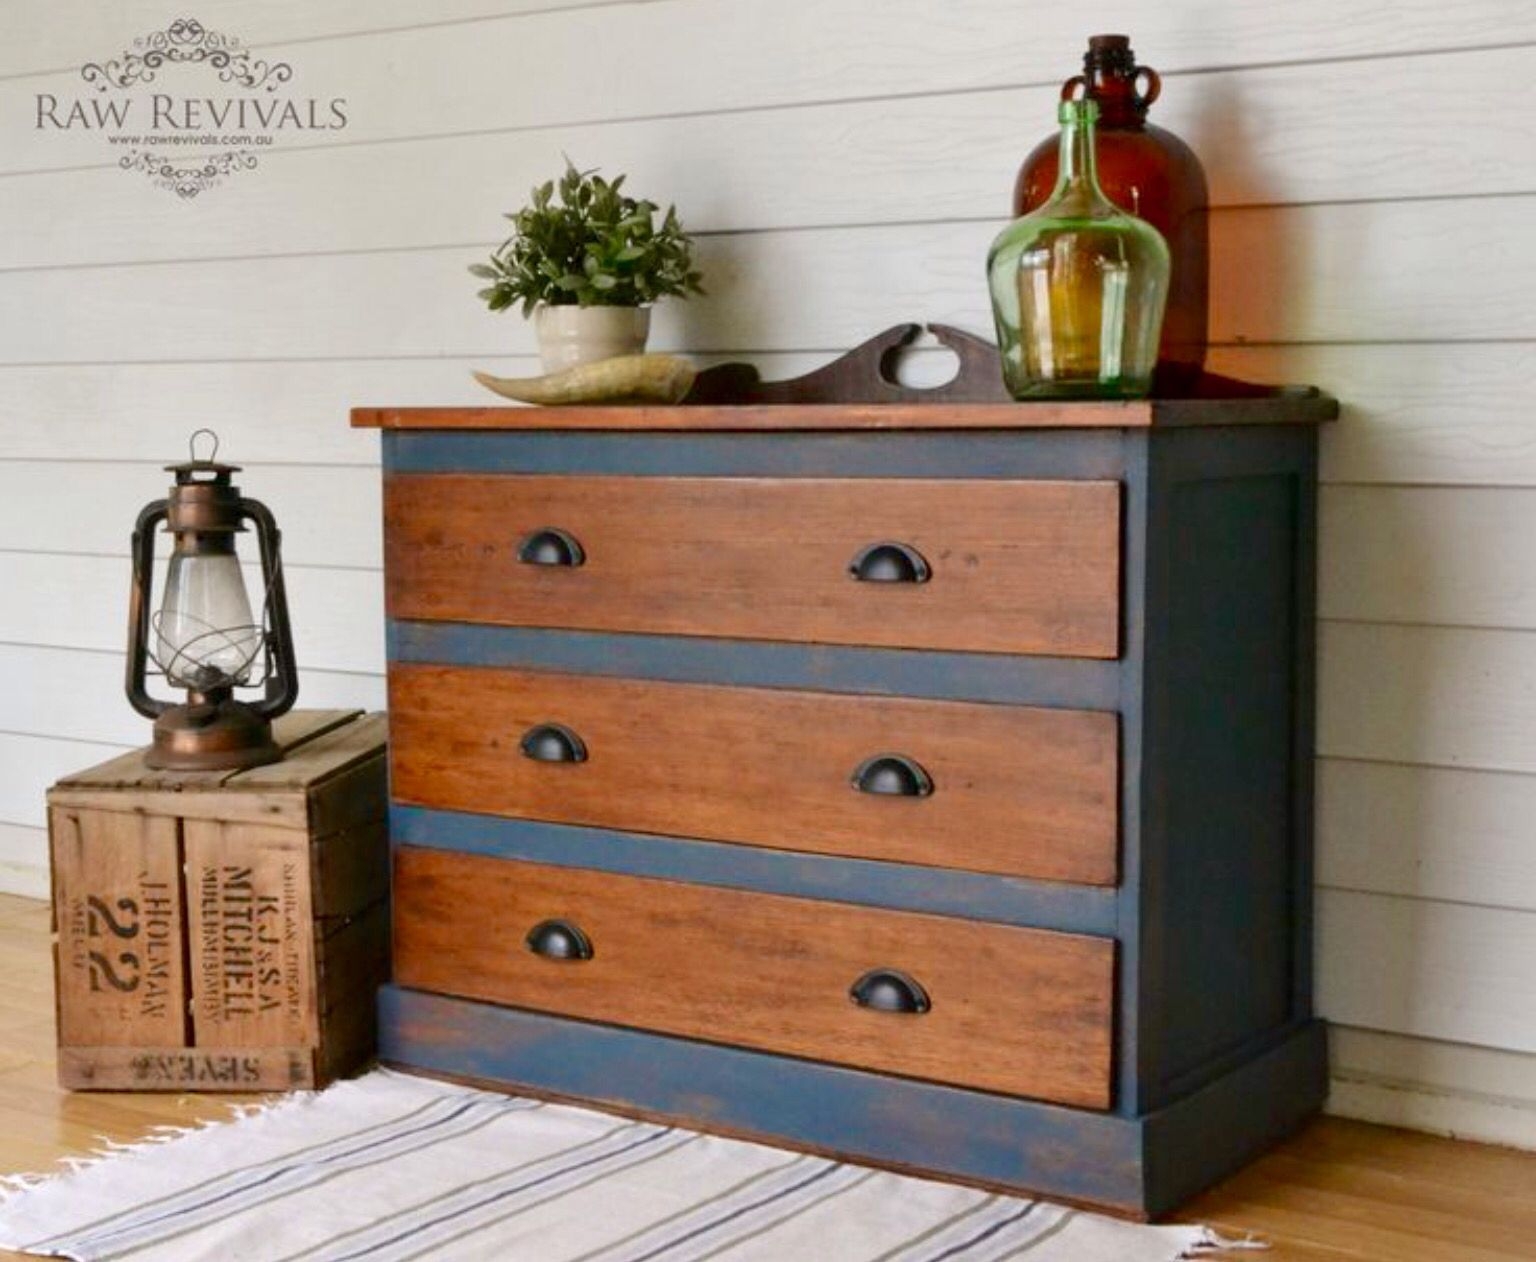 kids bedroom chest of drawers